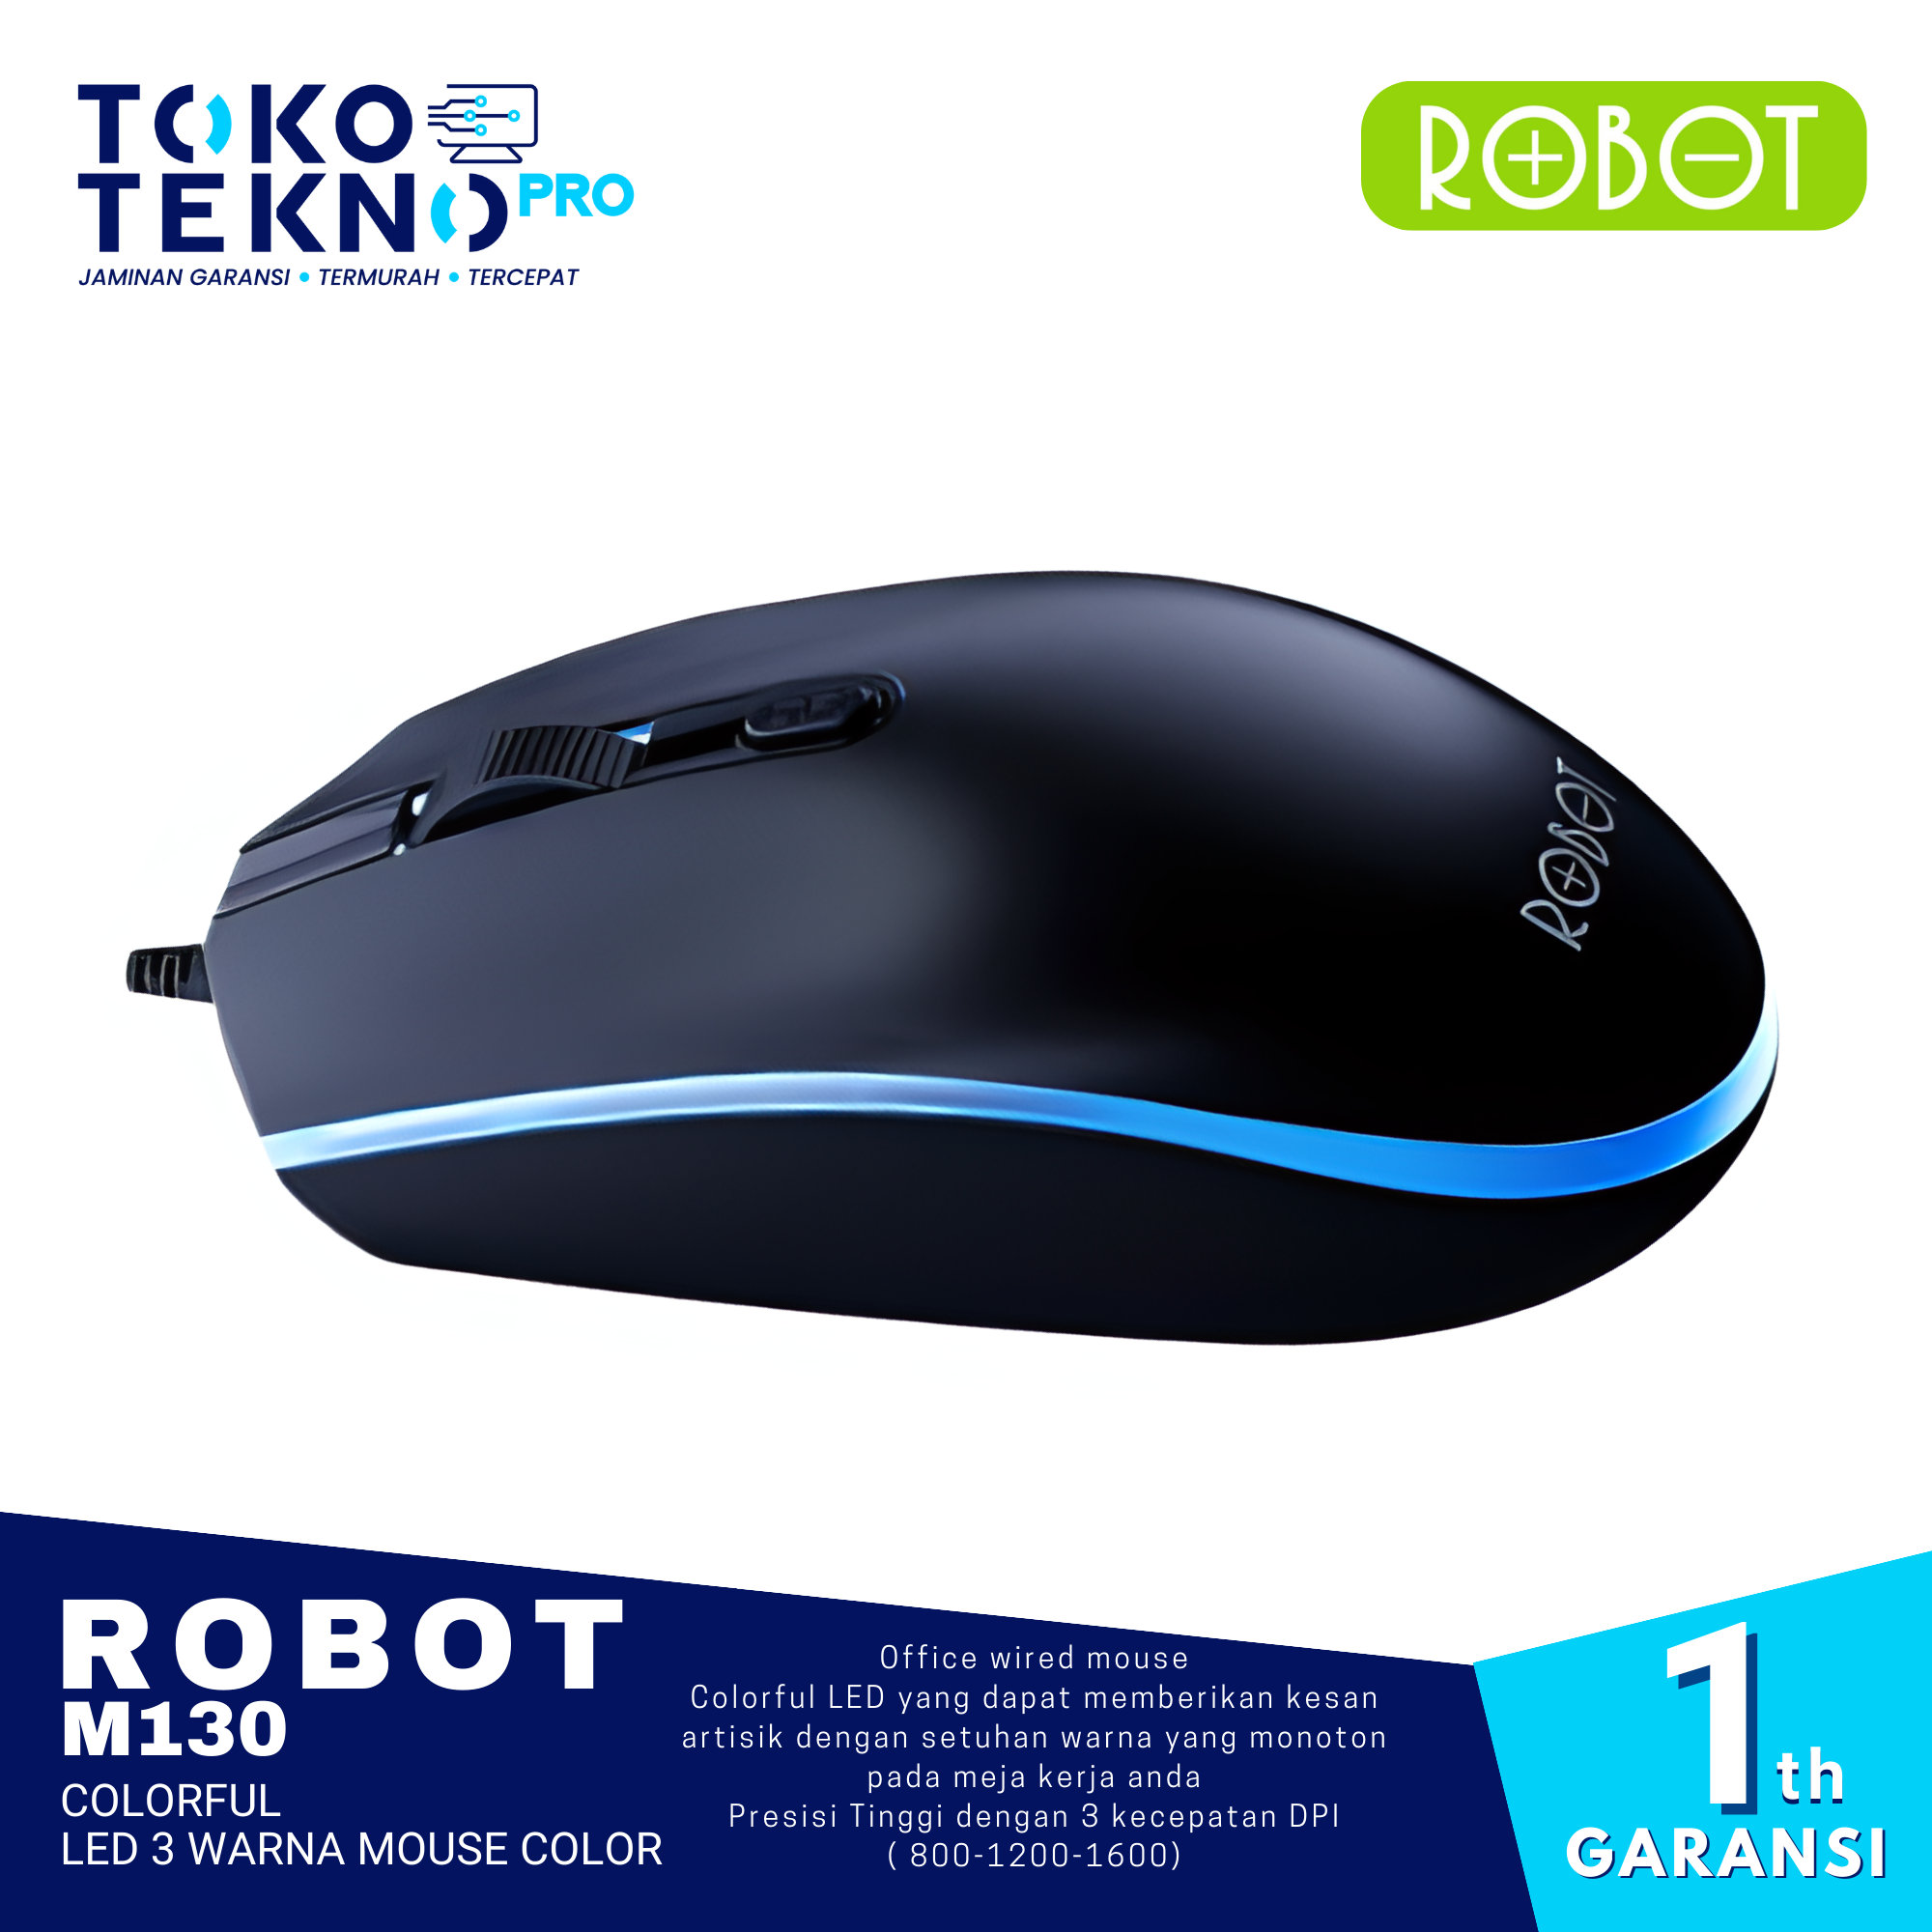 Robot M130 / M-130 Colorful LED 3 Warna Mouse Color